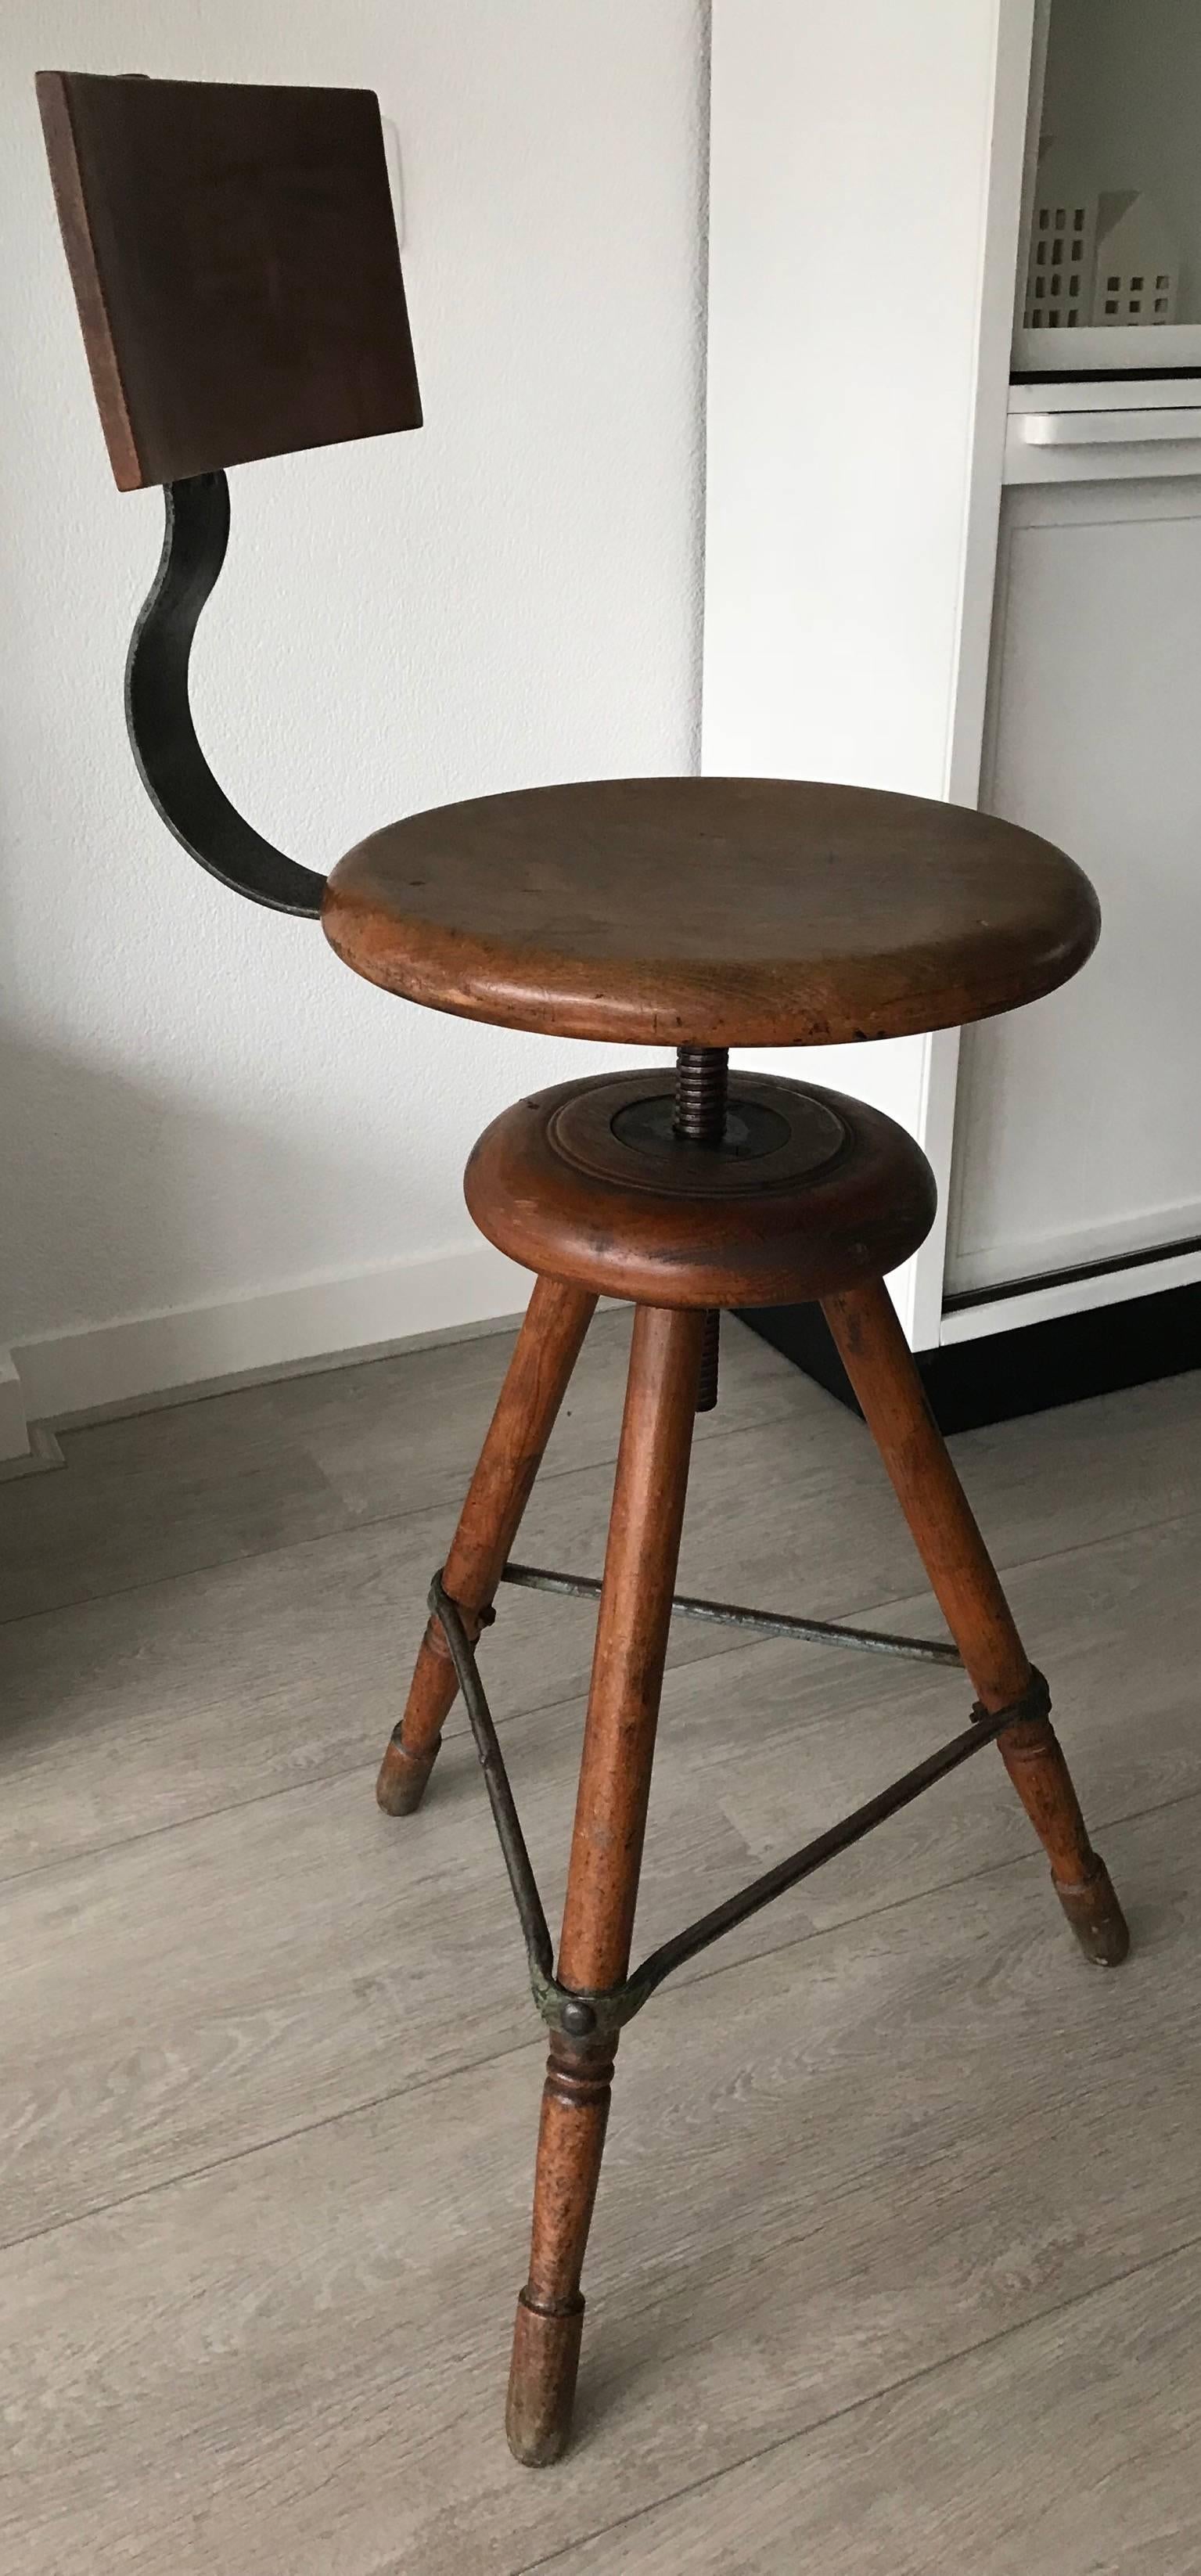 European Rare Industrial Artist Studio Spindle Chair or Stool Adjustable in Height, 1920s